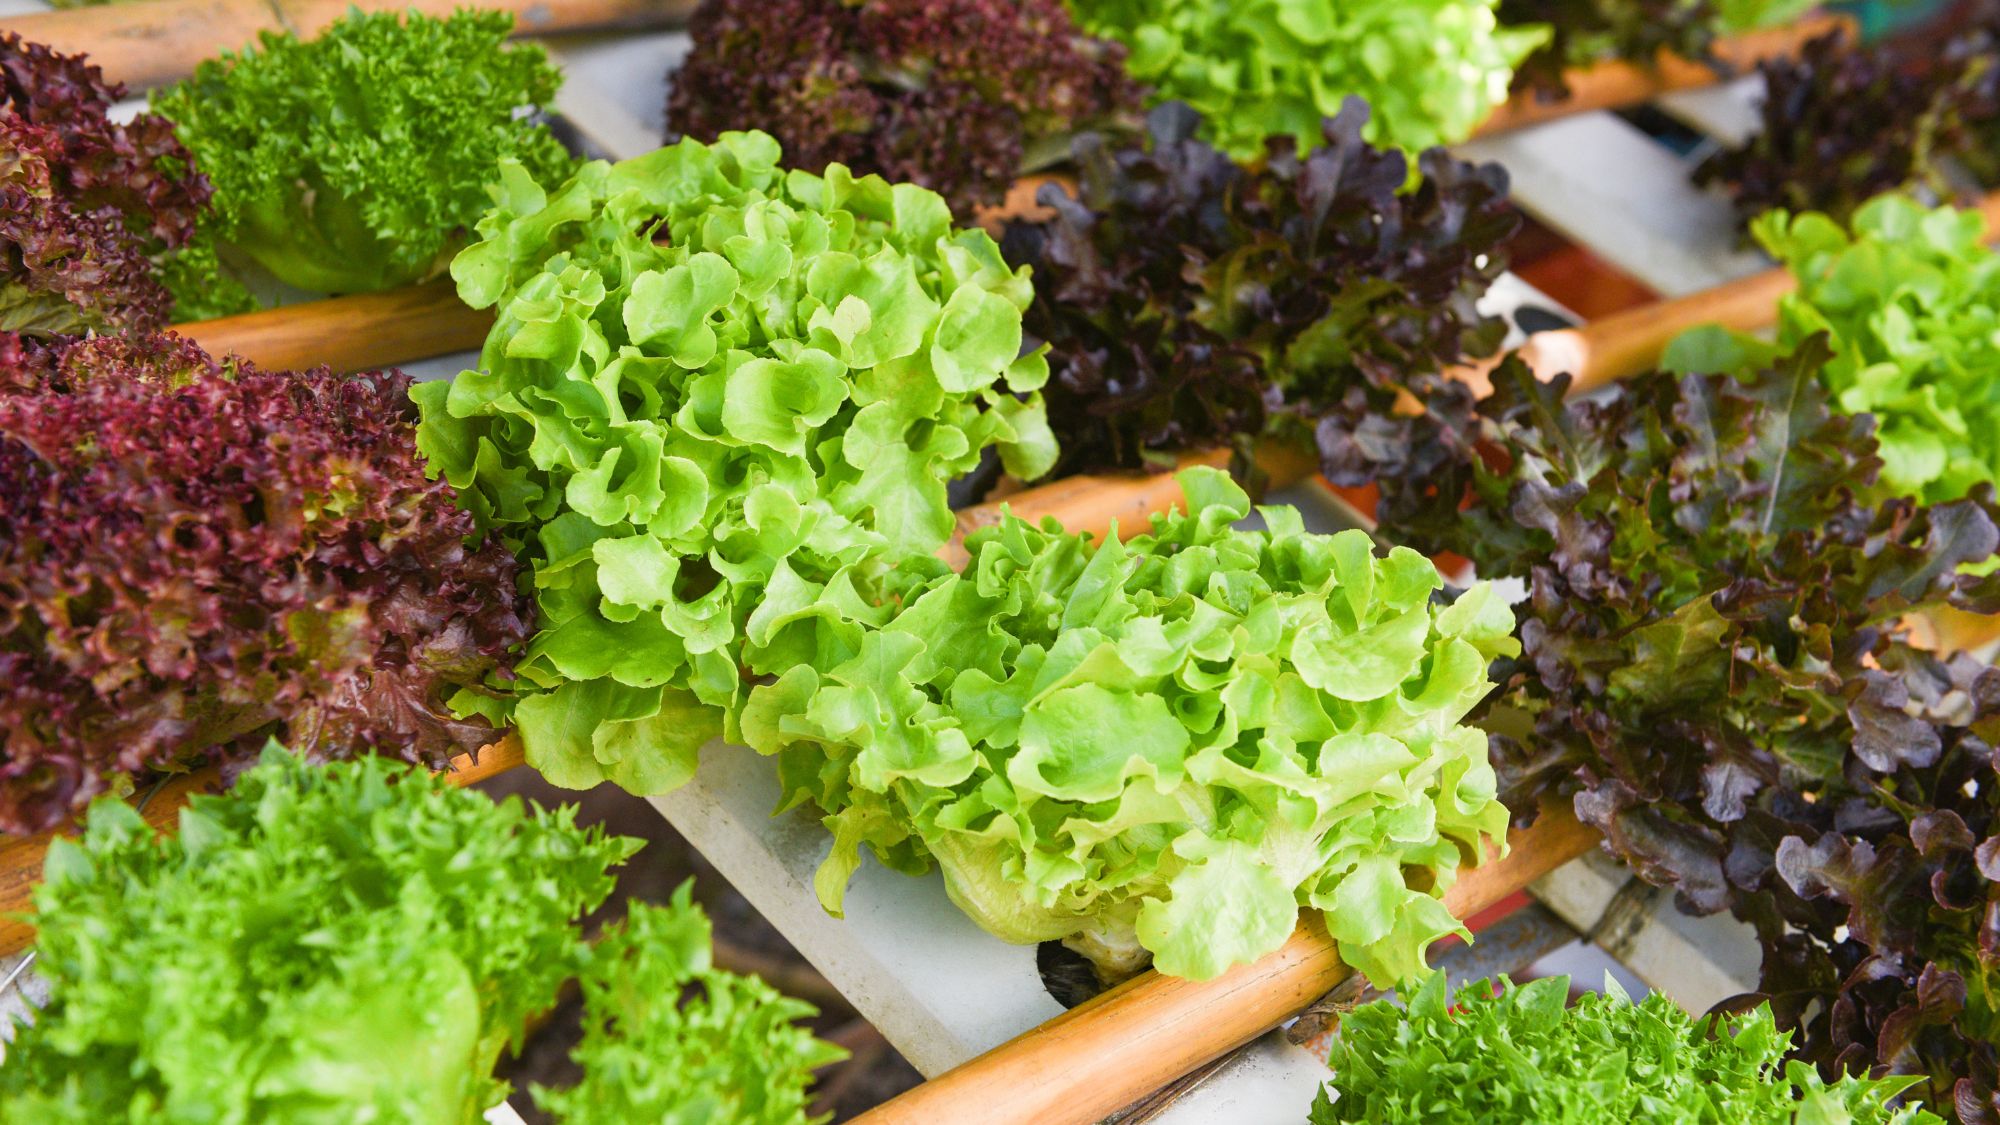 Several types of lettuce growing in a hothouse